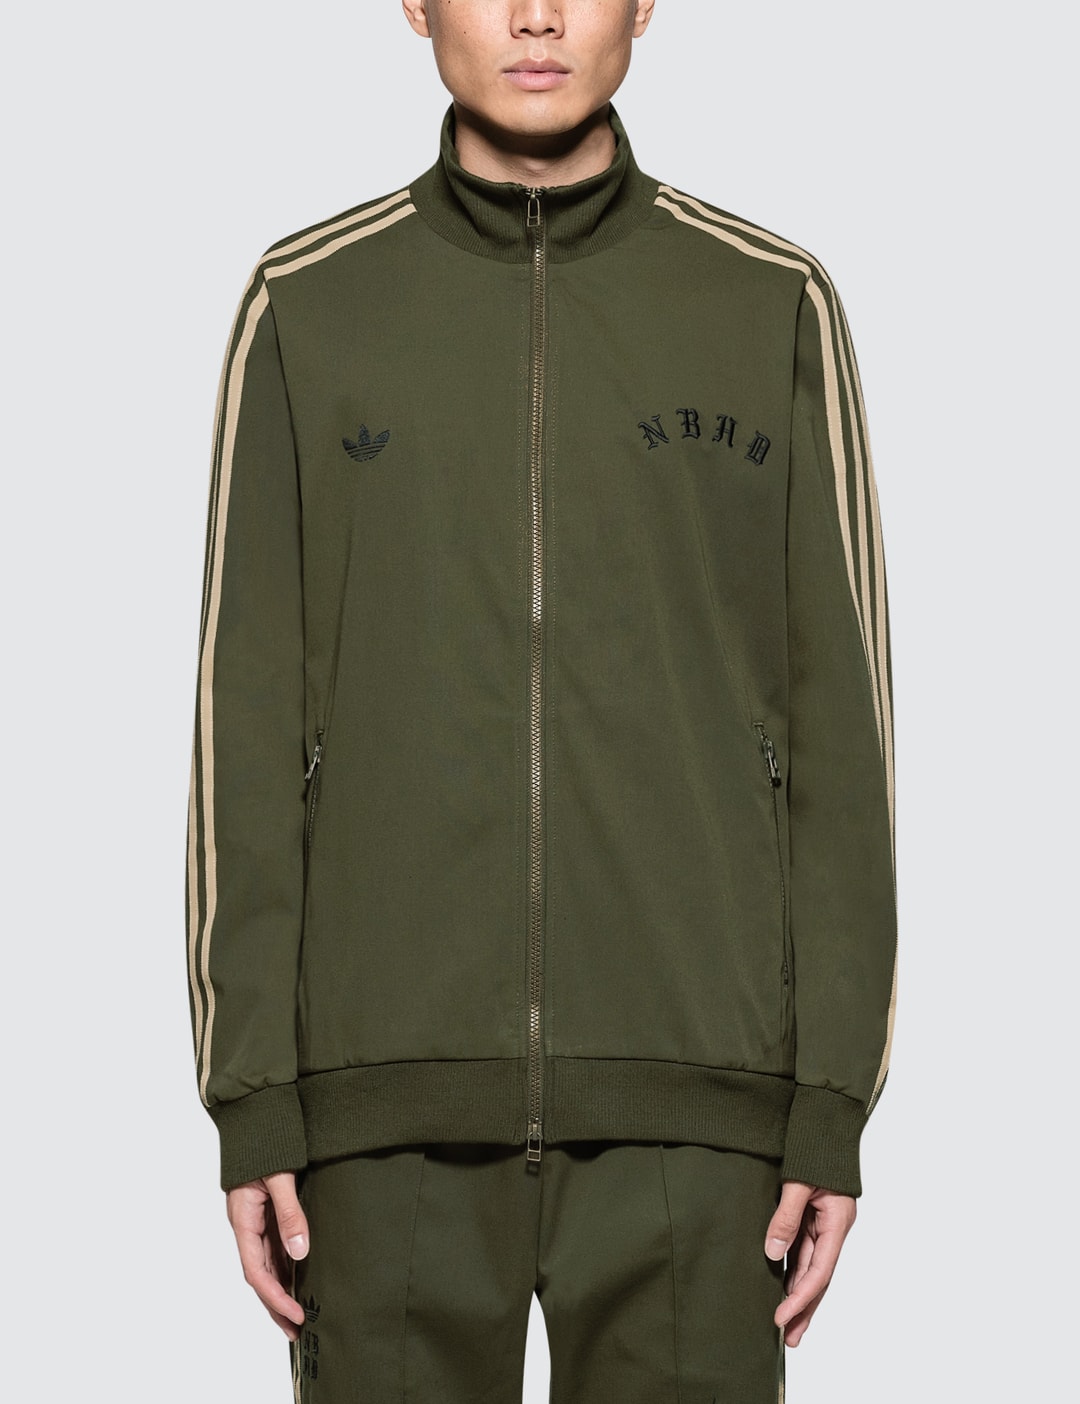 ropa interior Marco de referencia Presentador Adidas Originals - Neighborhood x Adidas NH Track Jacket | HBX - Globally  Curated Fashion and Lifestyle by Hypebeast